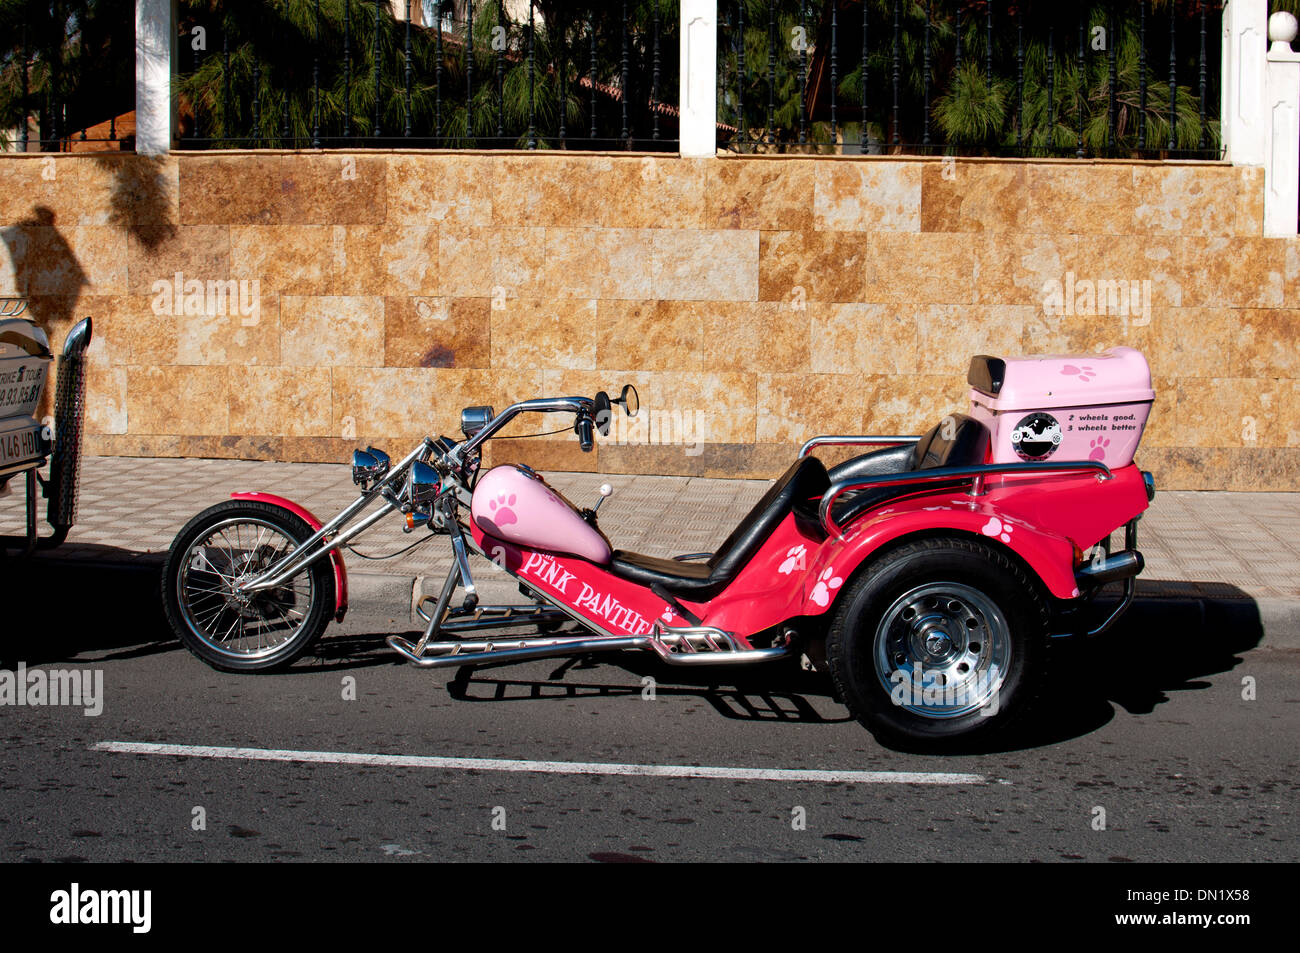 Trike Adventure High Resolution Stock Photography and Images - Alamy